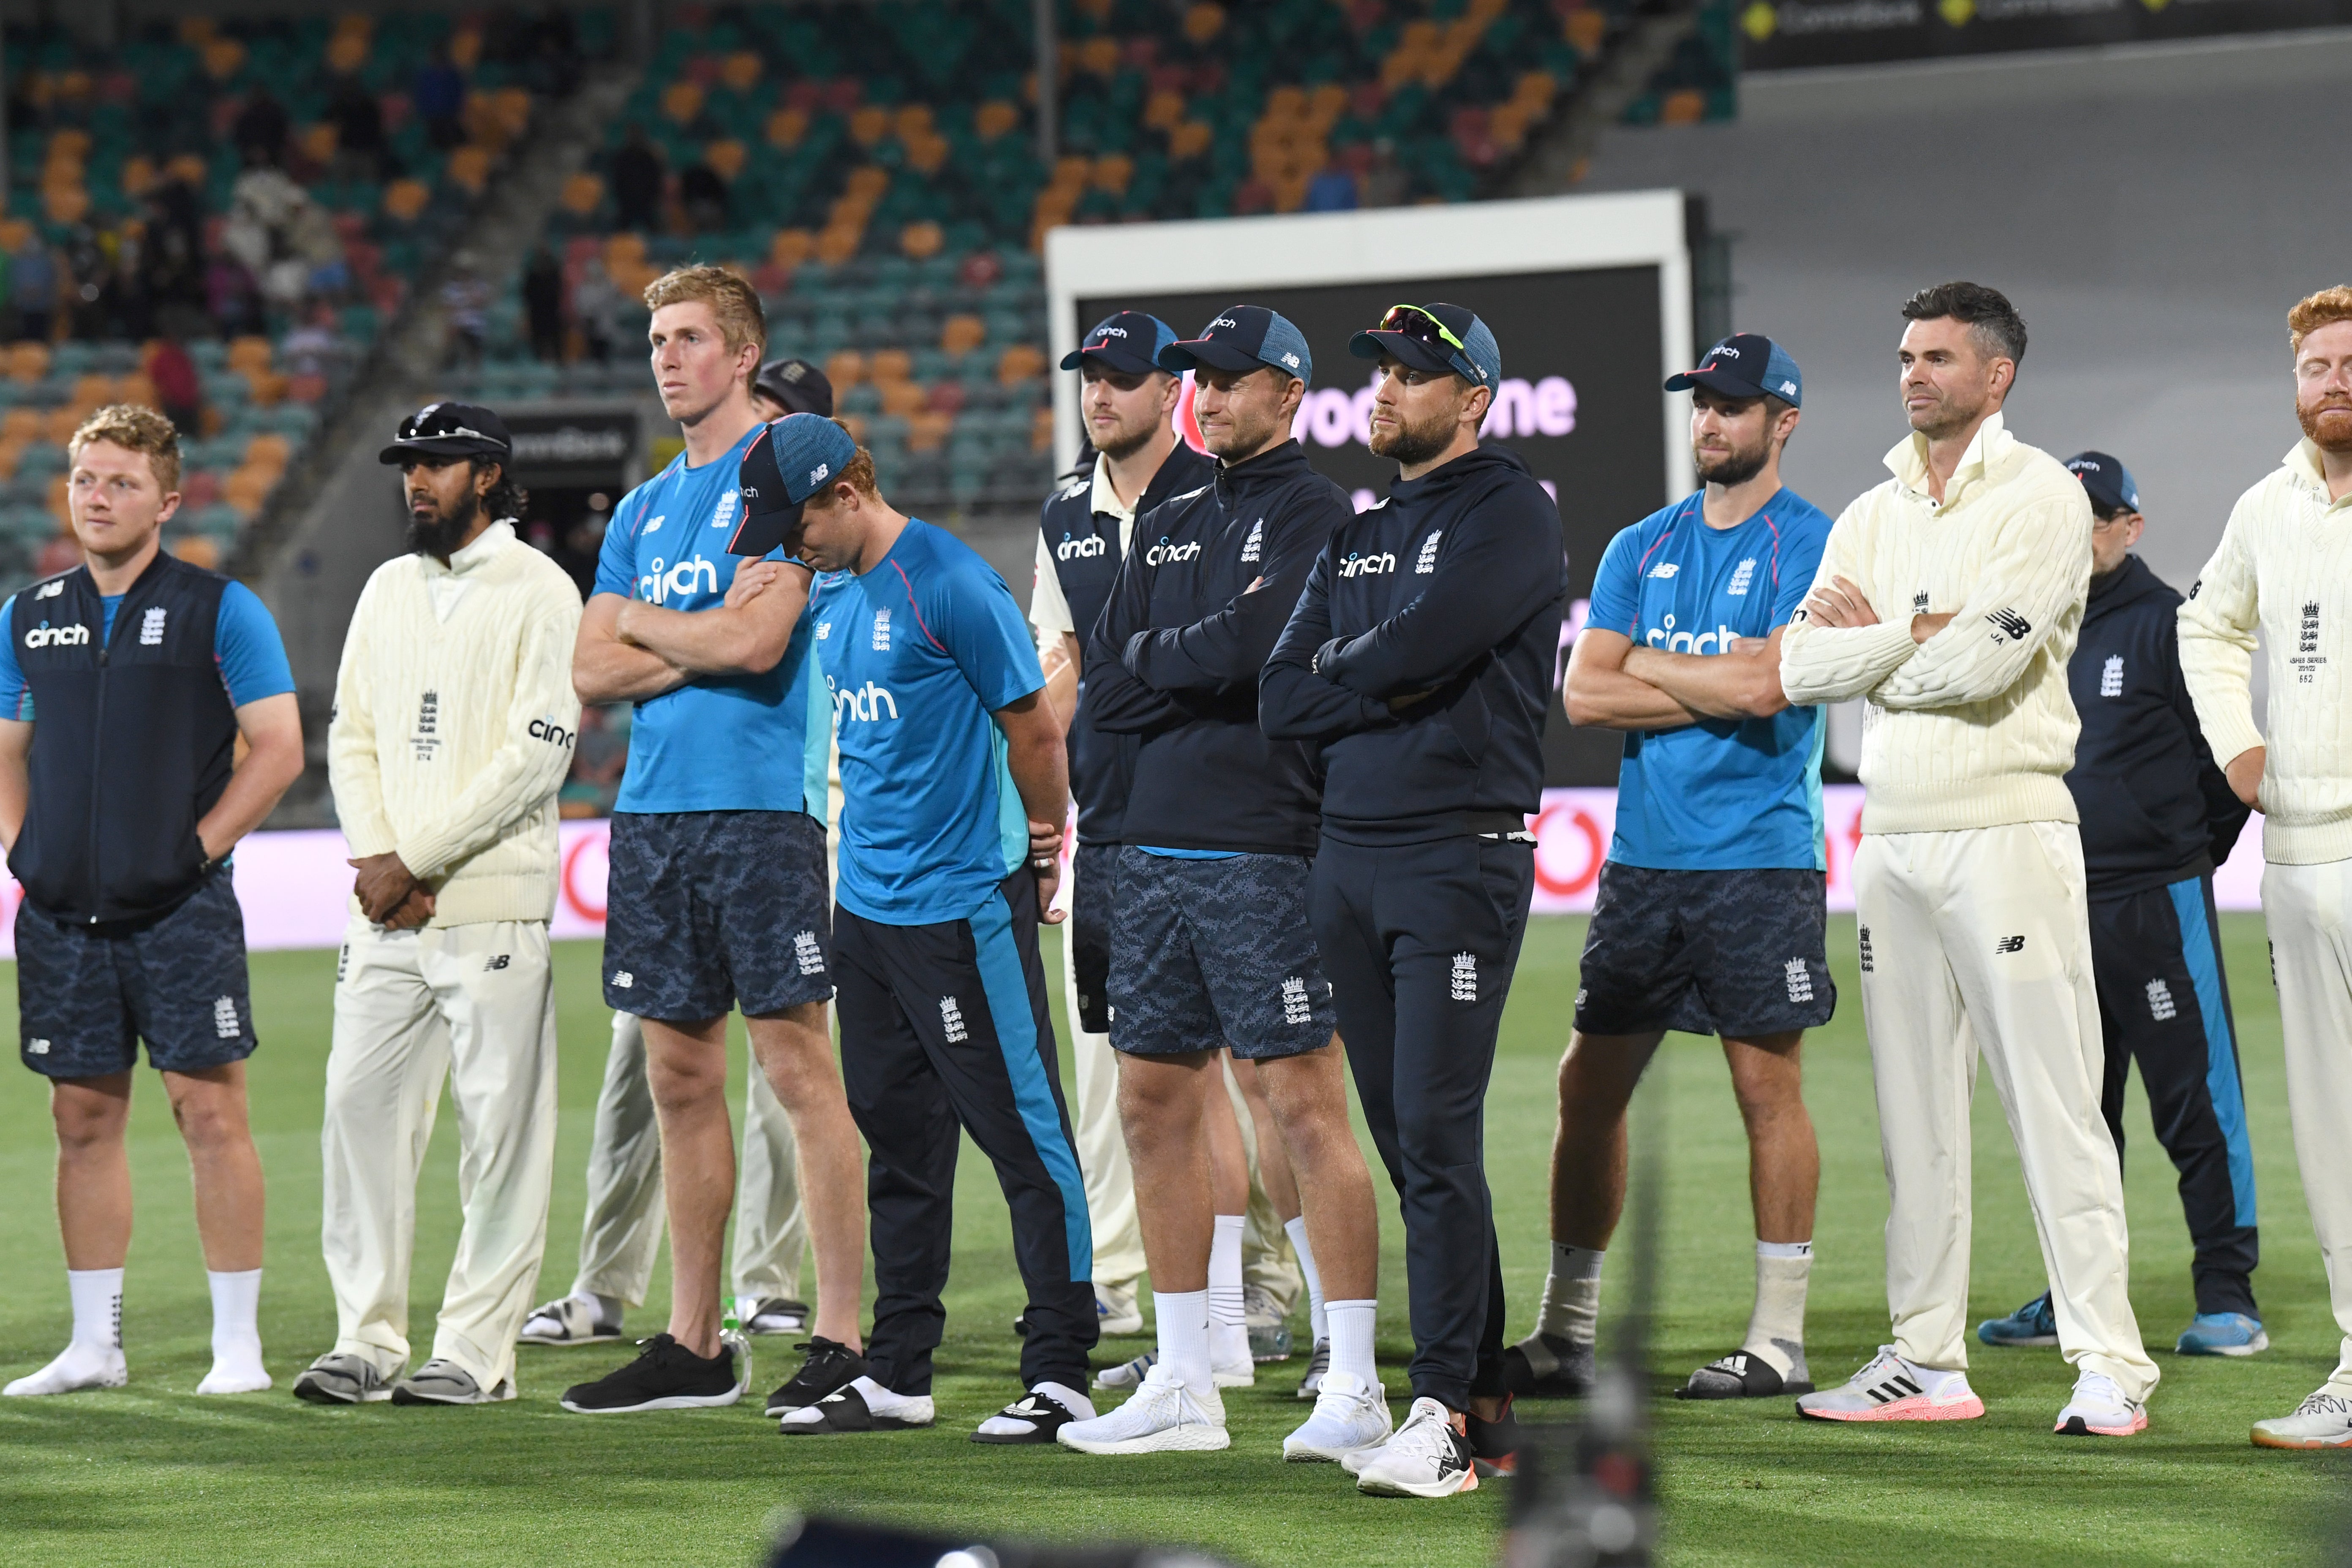 England’s players show their dejection after losing the fifth Ashes test (Darren England via AAP)